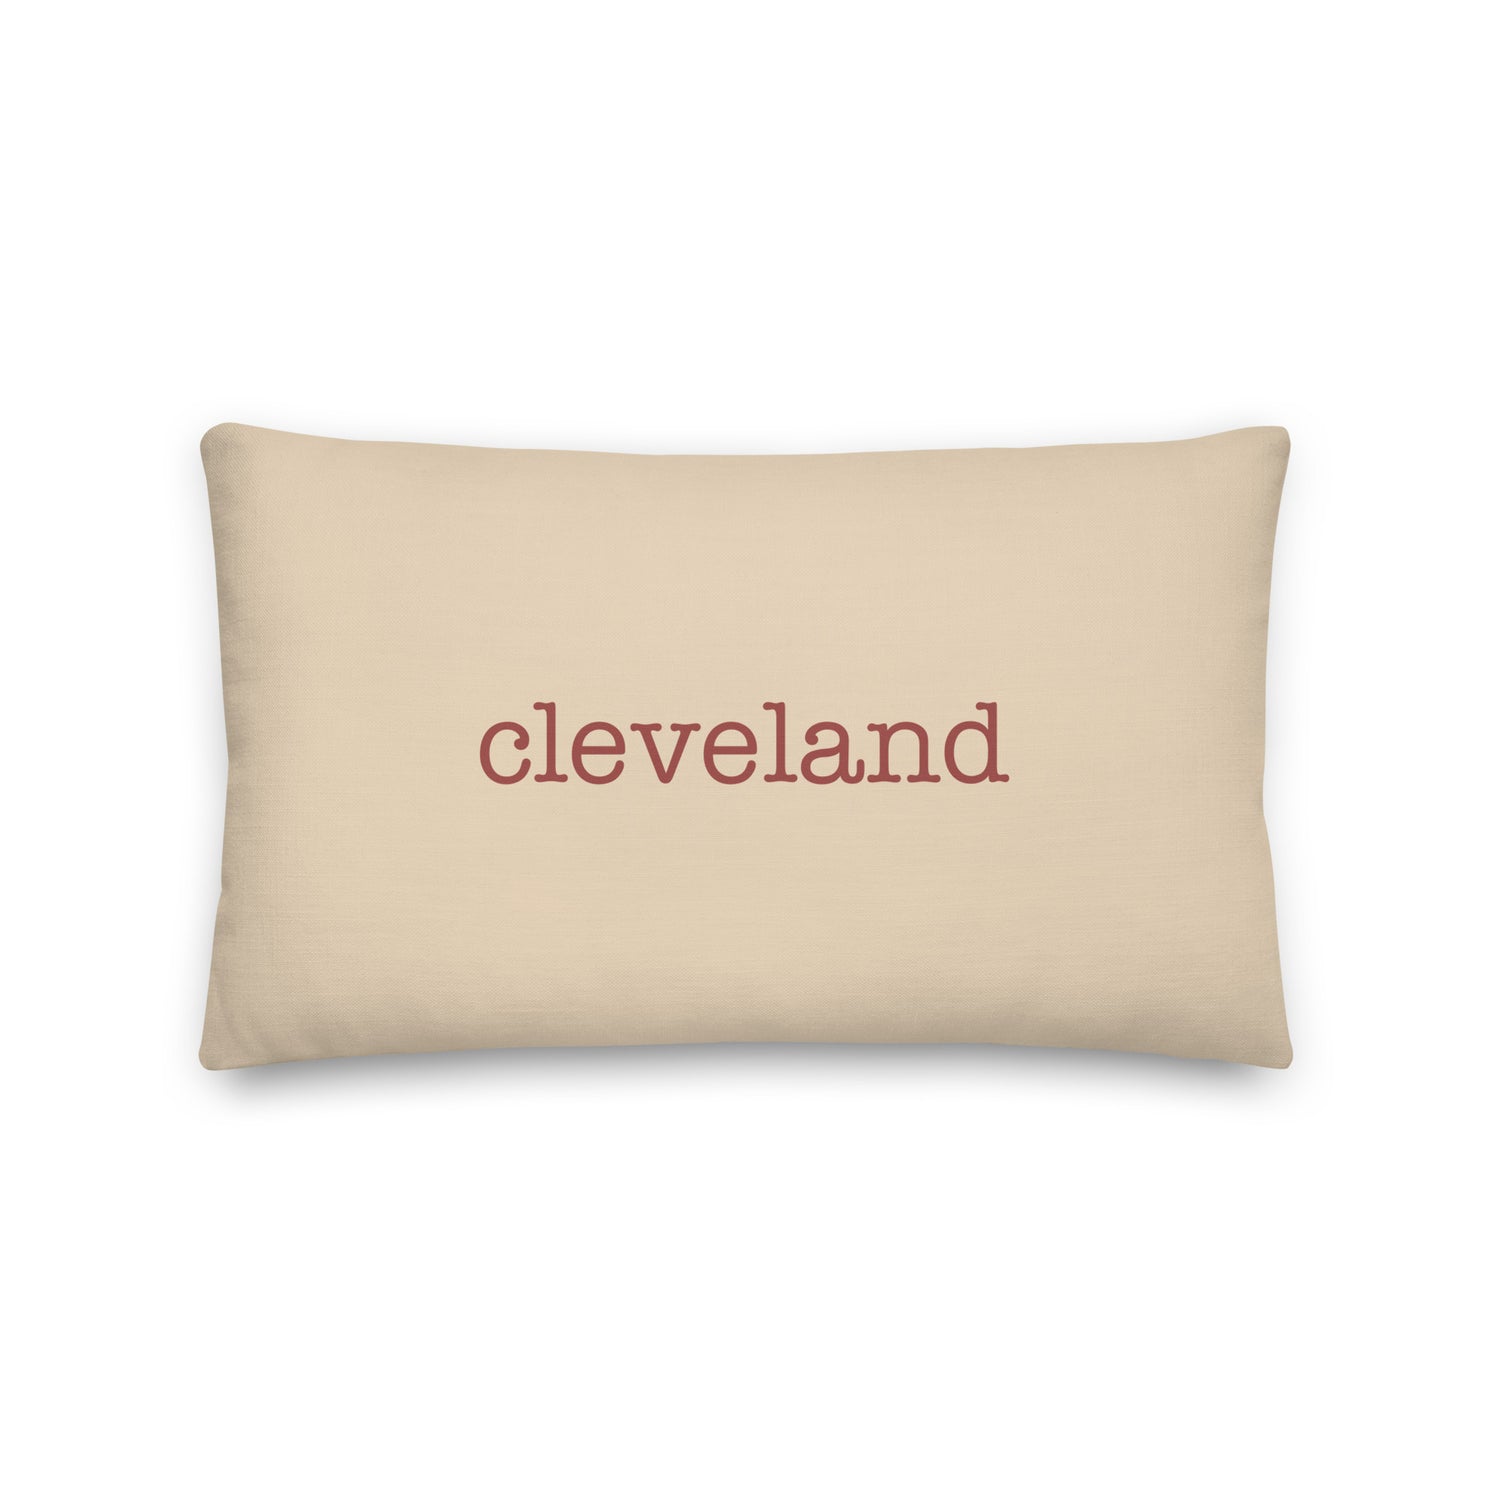 Cleveland Ohio Pillows and Blankets • CLE Airport Code